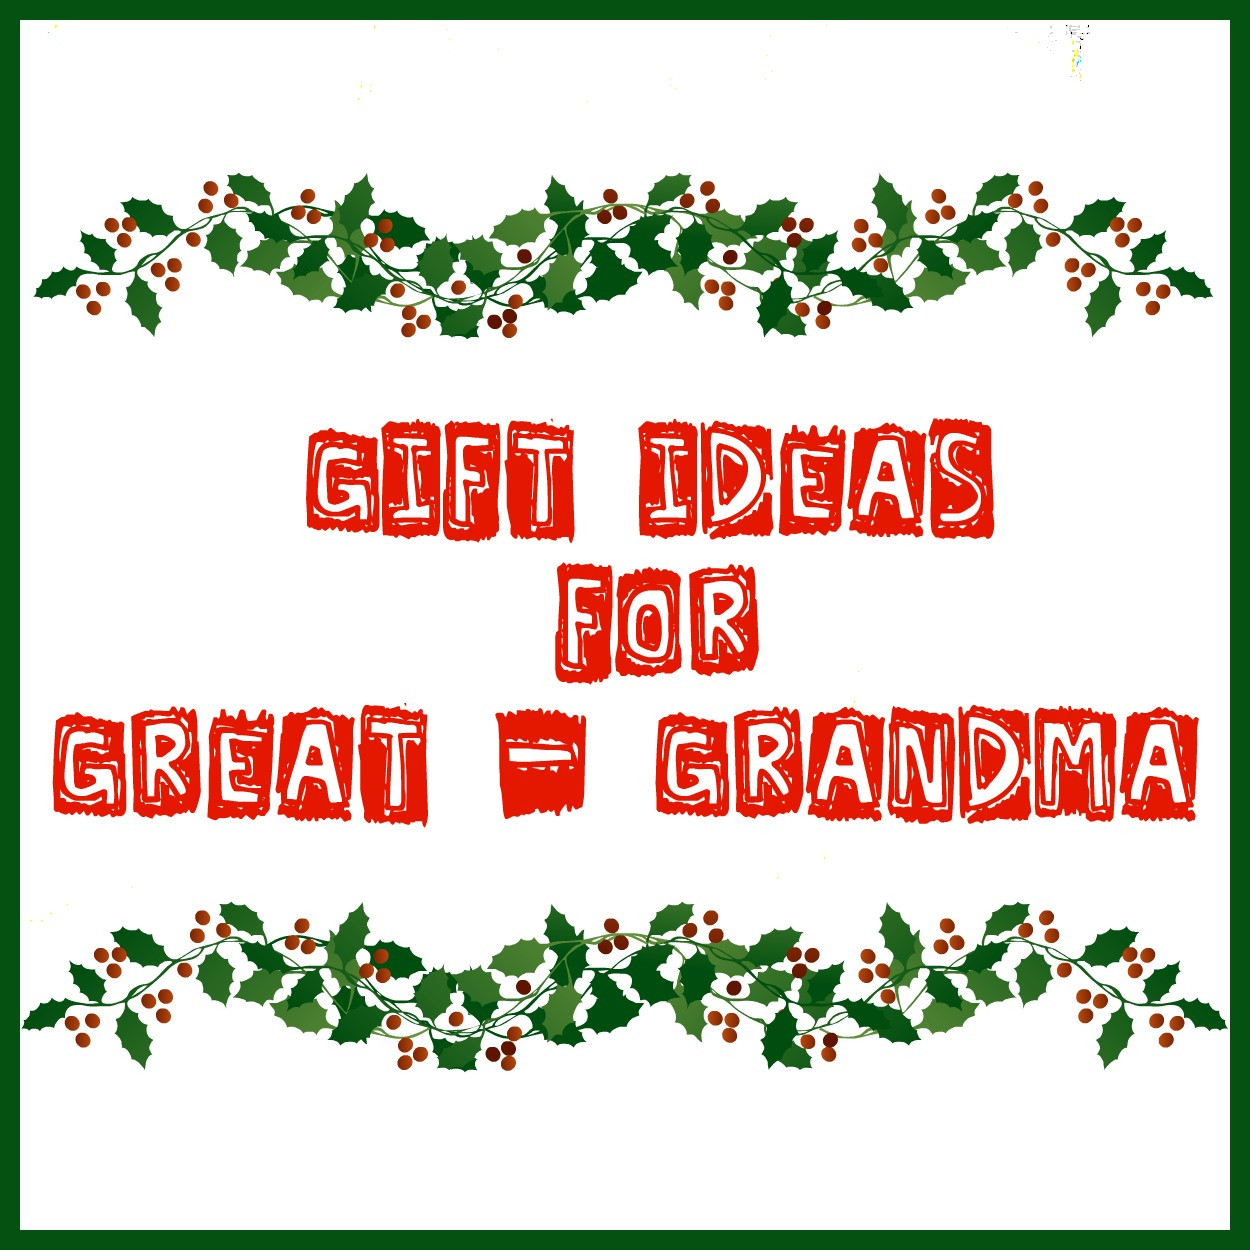 Gift Ideas For New Grandmothers
 The Bean Sprout Notes Gift Ideas for Great Grandma